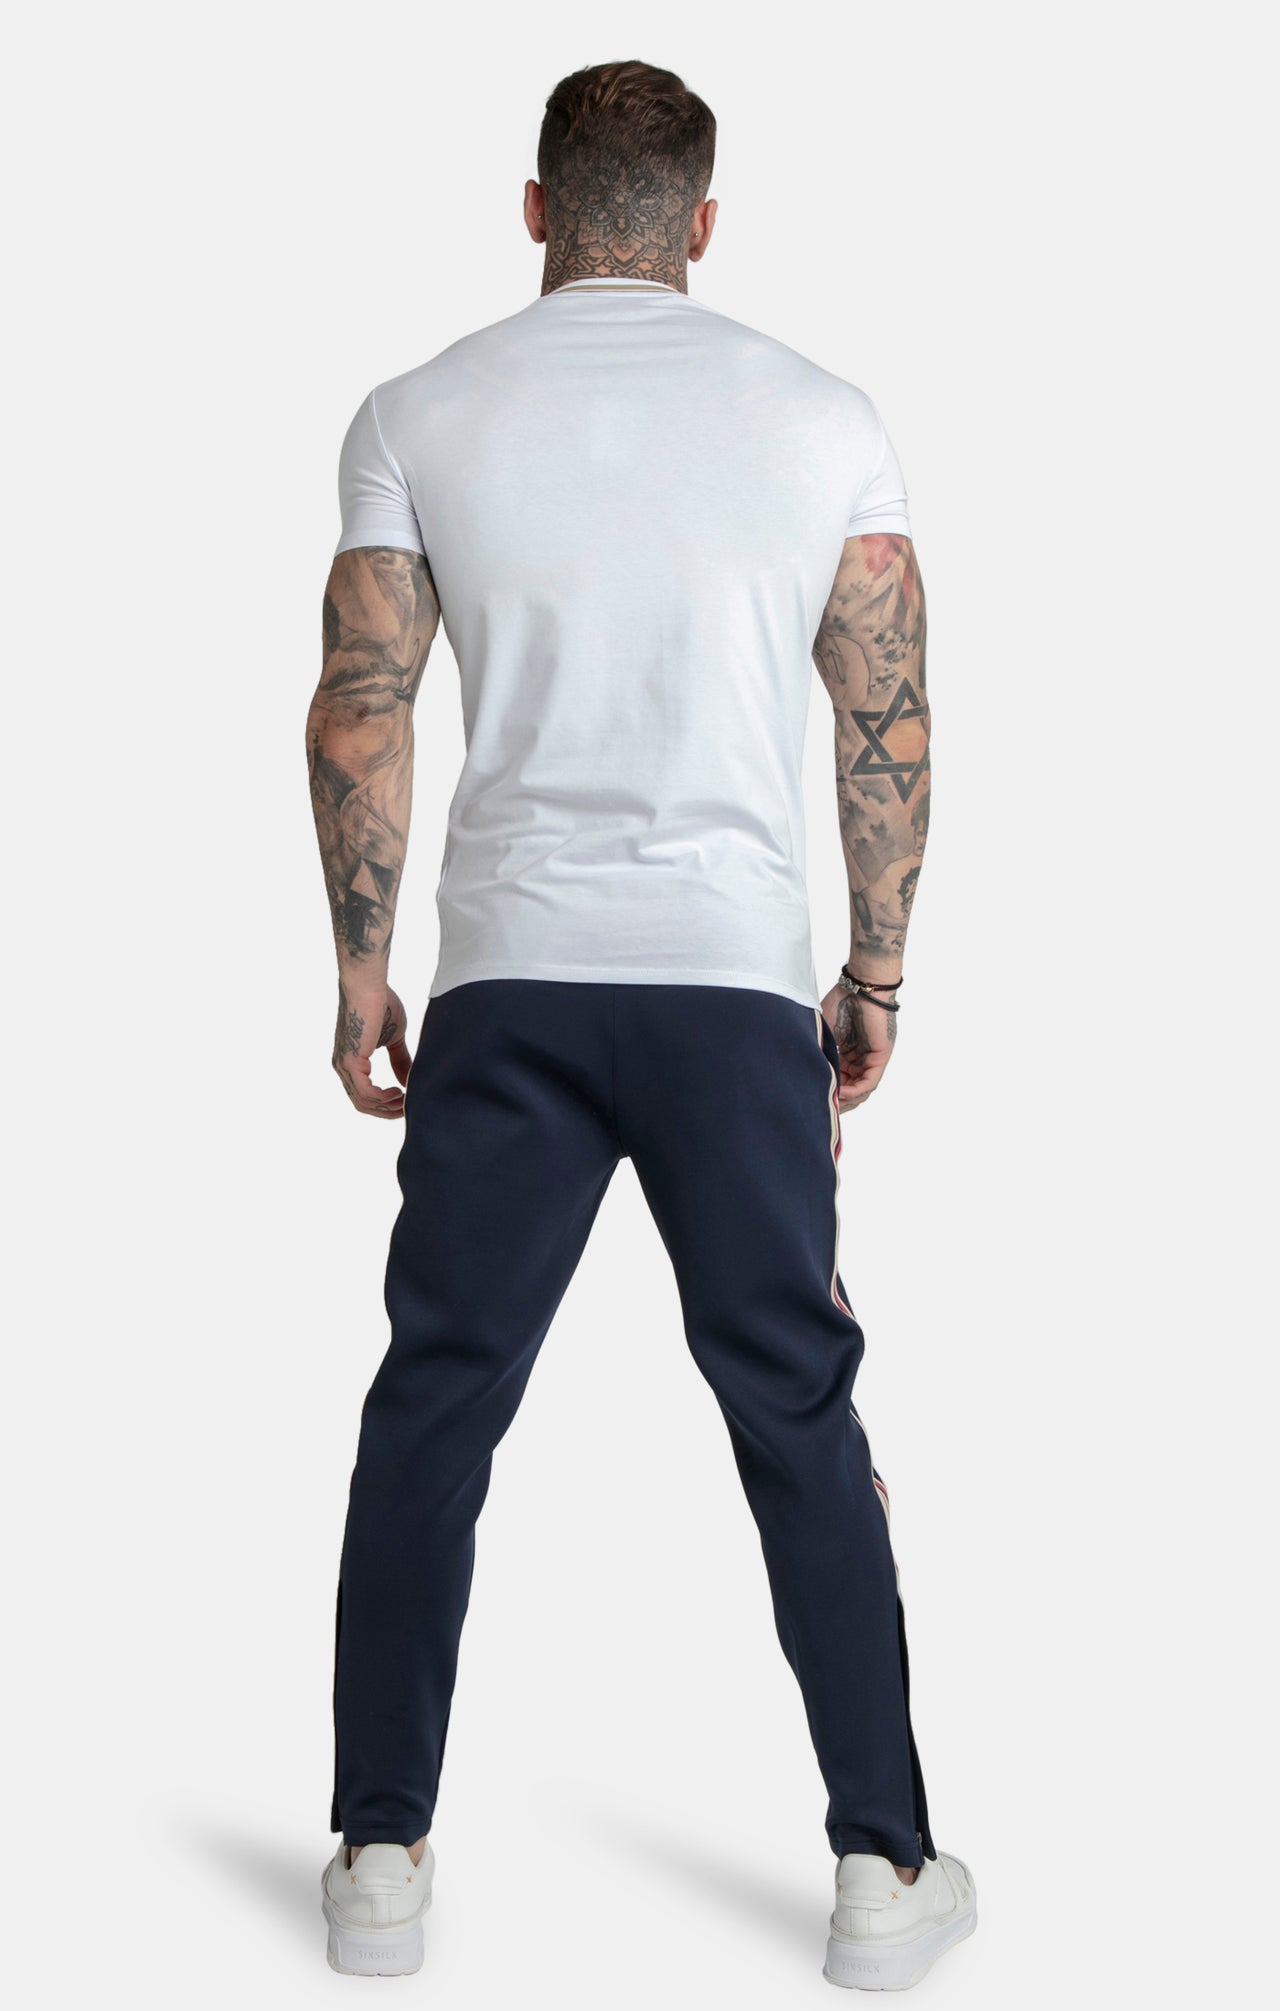 Messi x SikSilk White Muscle Fit T-Shirt (4)